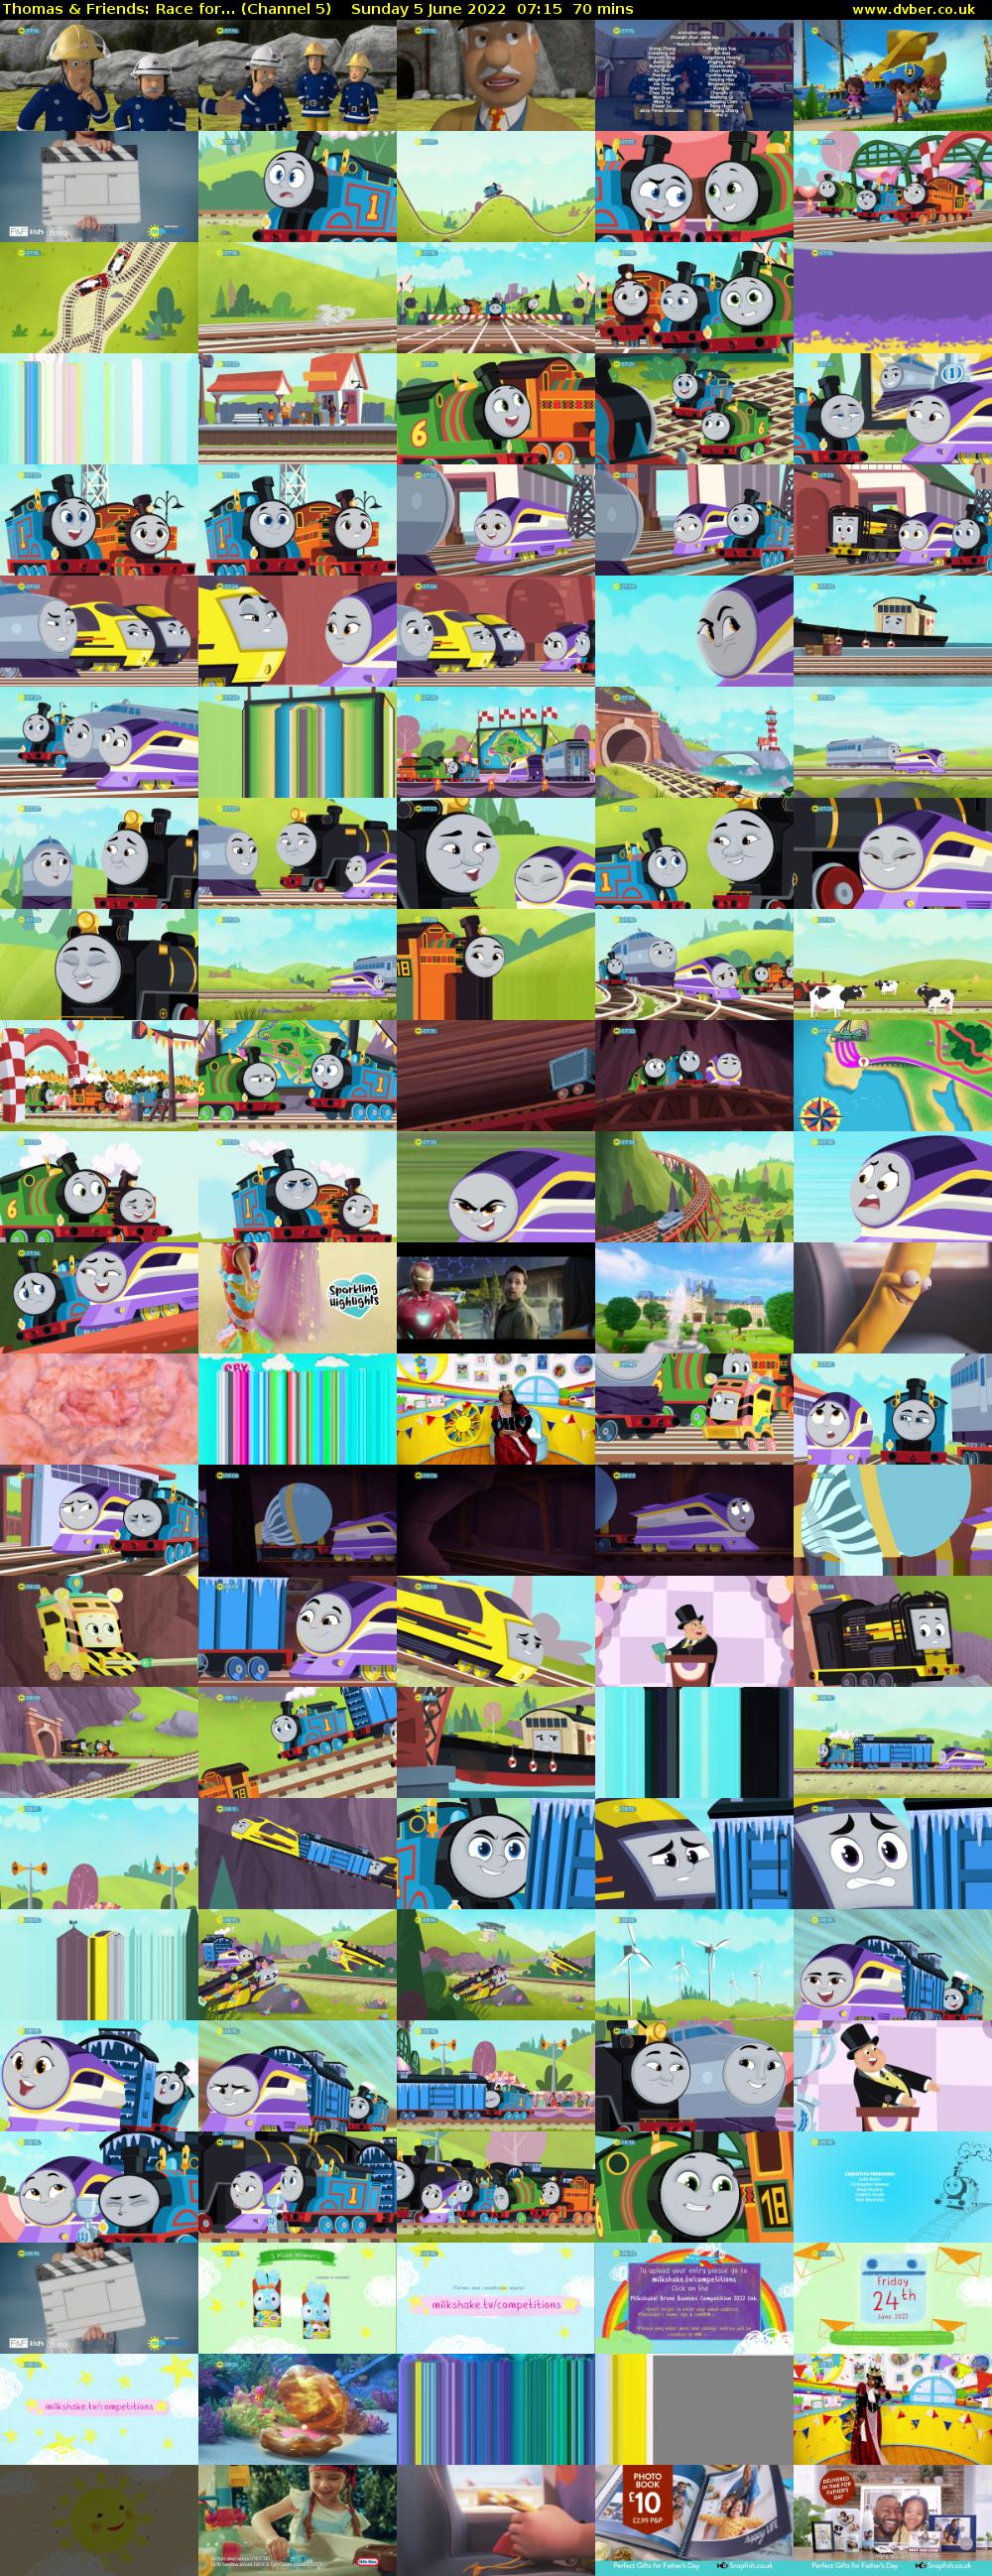 Thomas & Friends: Race for... (Channel 5) Sunday 5 June 2022 07:15 - 08:25